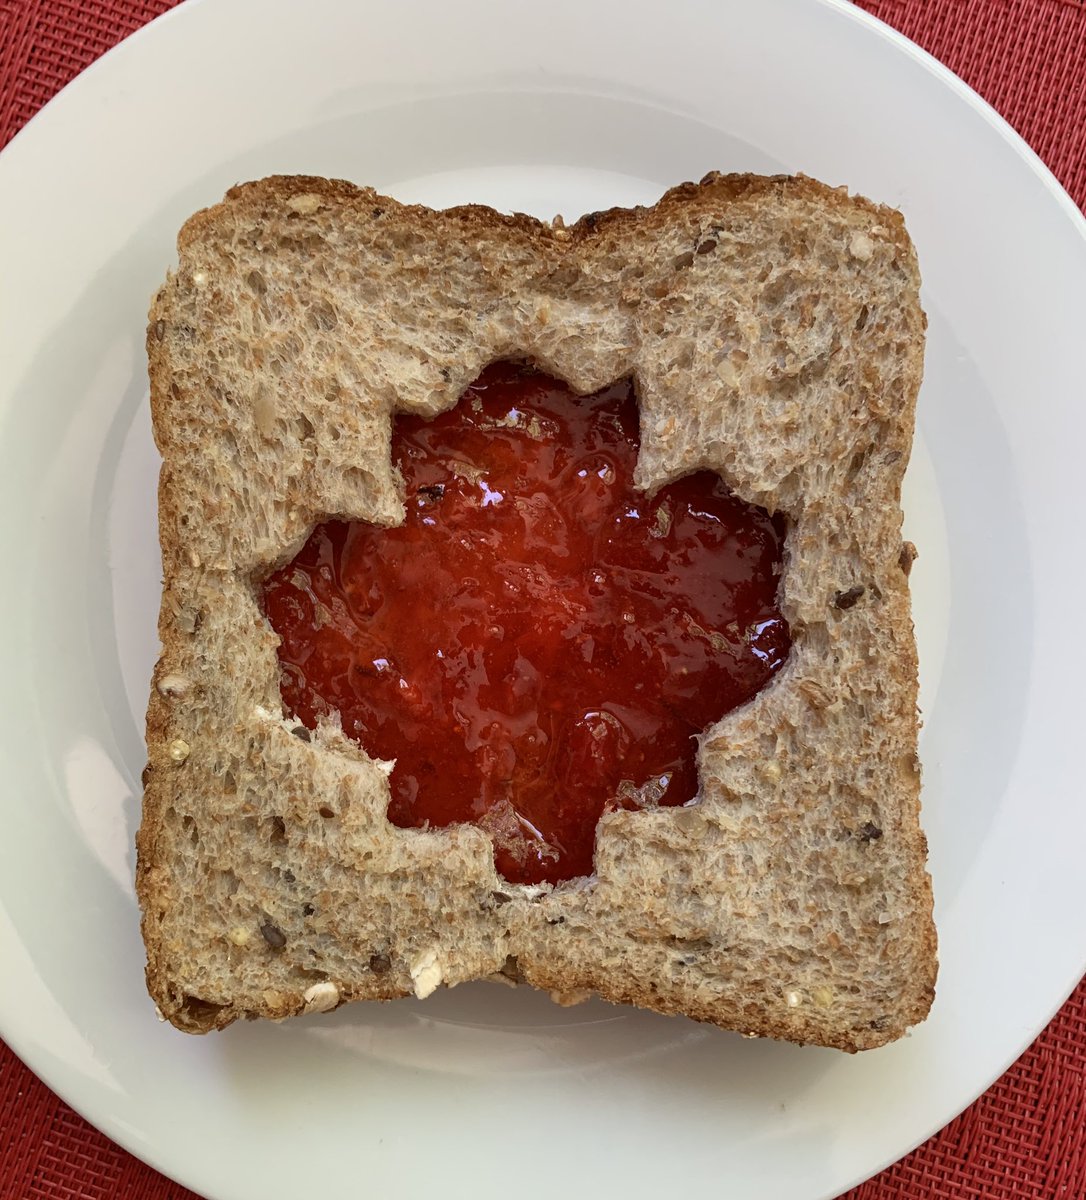 We are now closed @COBSTheBeach and will open at 8 a.m tomorrow morning for Canada day! #shoplocal #staywell #celebrate #fresh #ohcanada #cobsbread #countrygrain #picnicsandwich #homemadejam #tofoodies #yyzeats